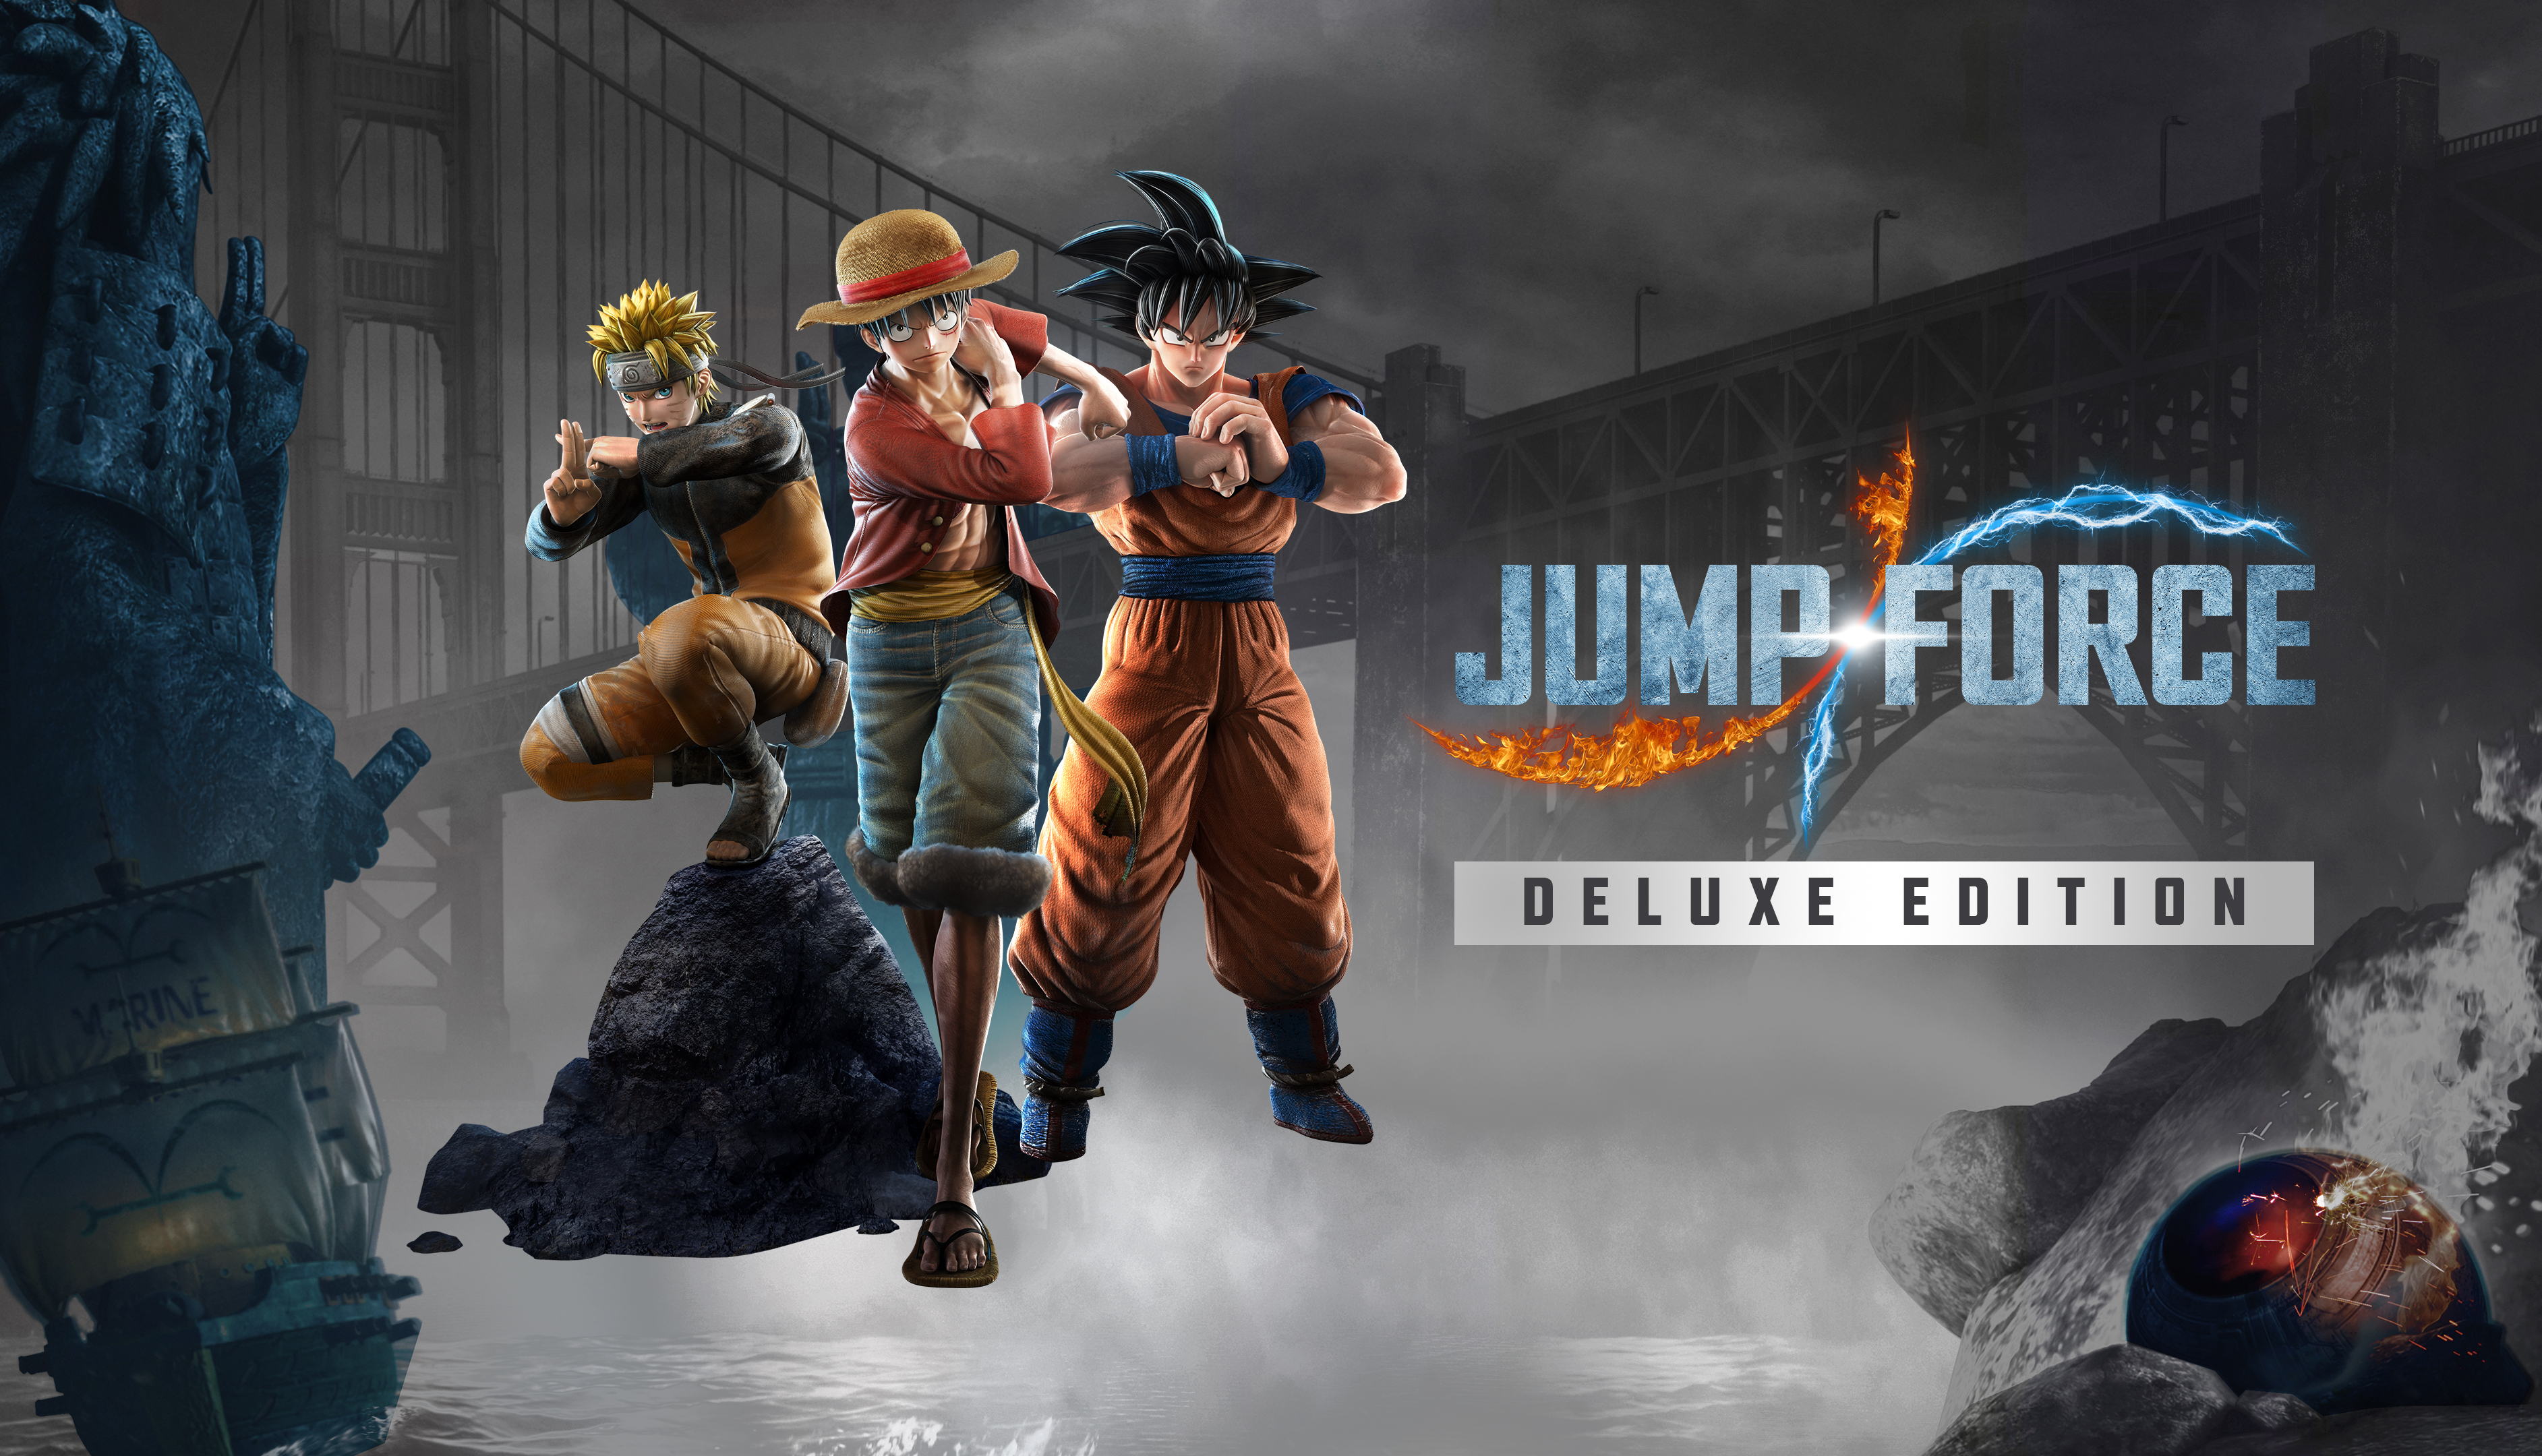 Jump Force: Deluxe Edition preorder bonuses for Japan revealed